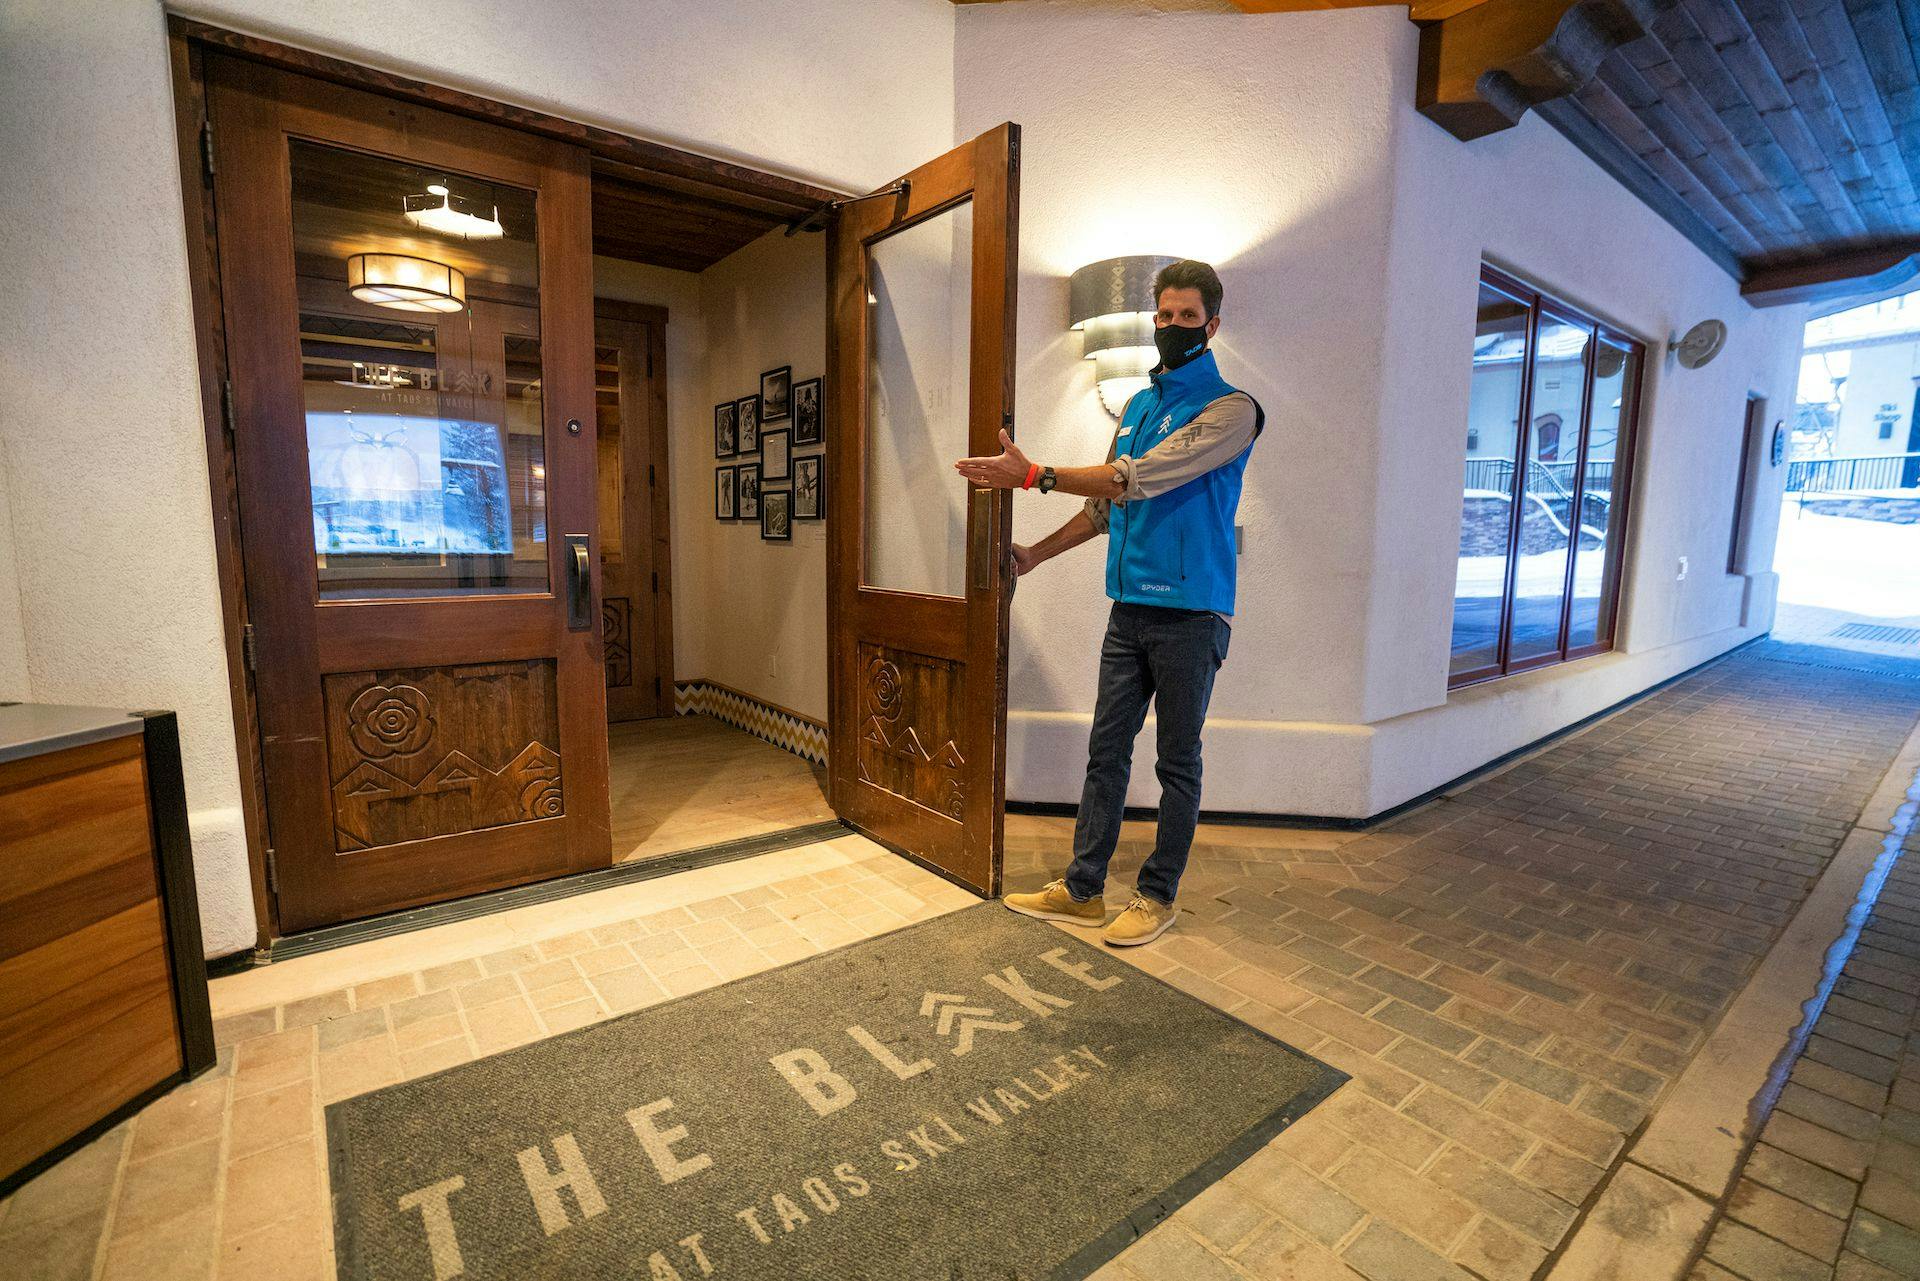 A Blake hausmeister opens the lobby door welcoming guests to the hotel